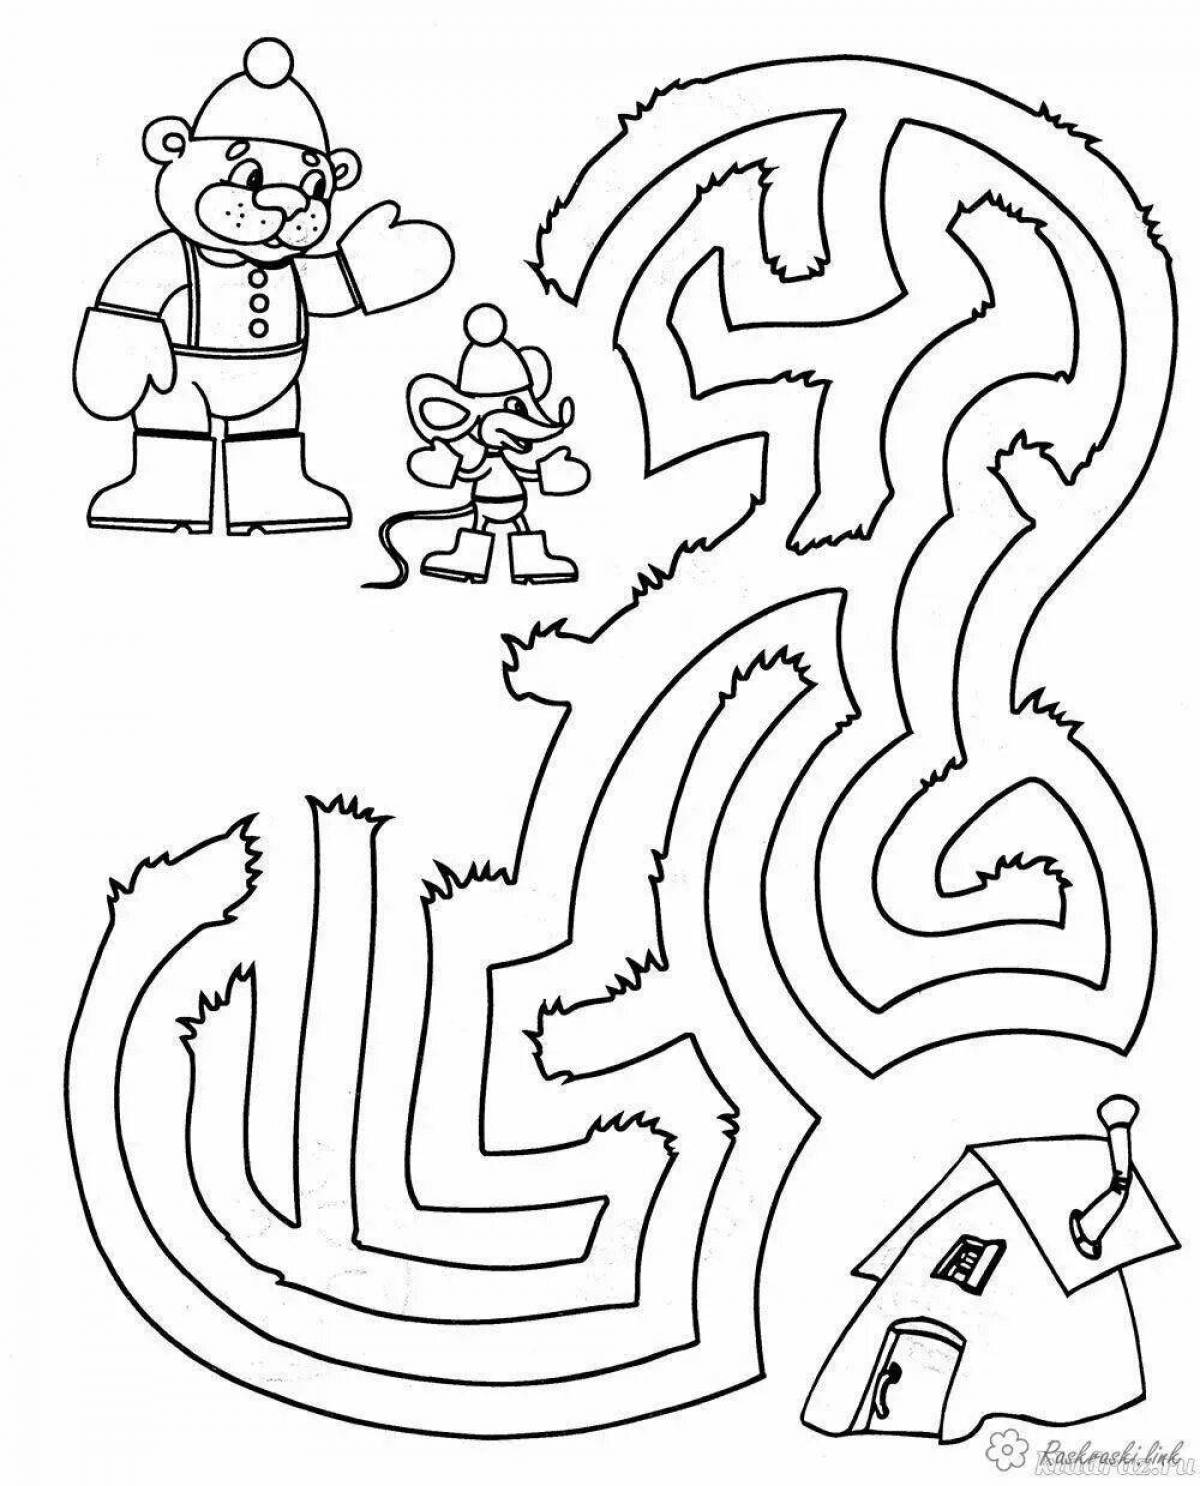 Colourful maze coloring book for kids